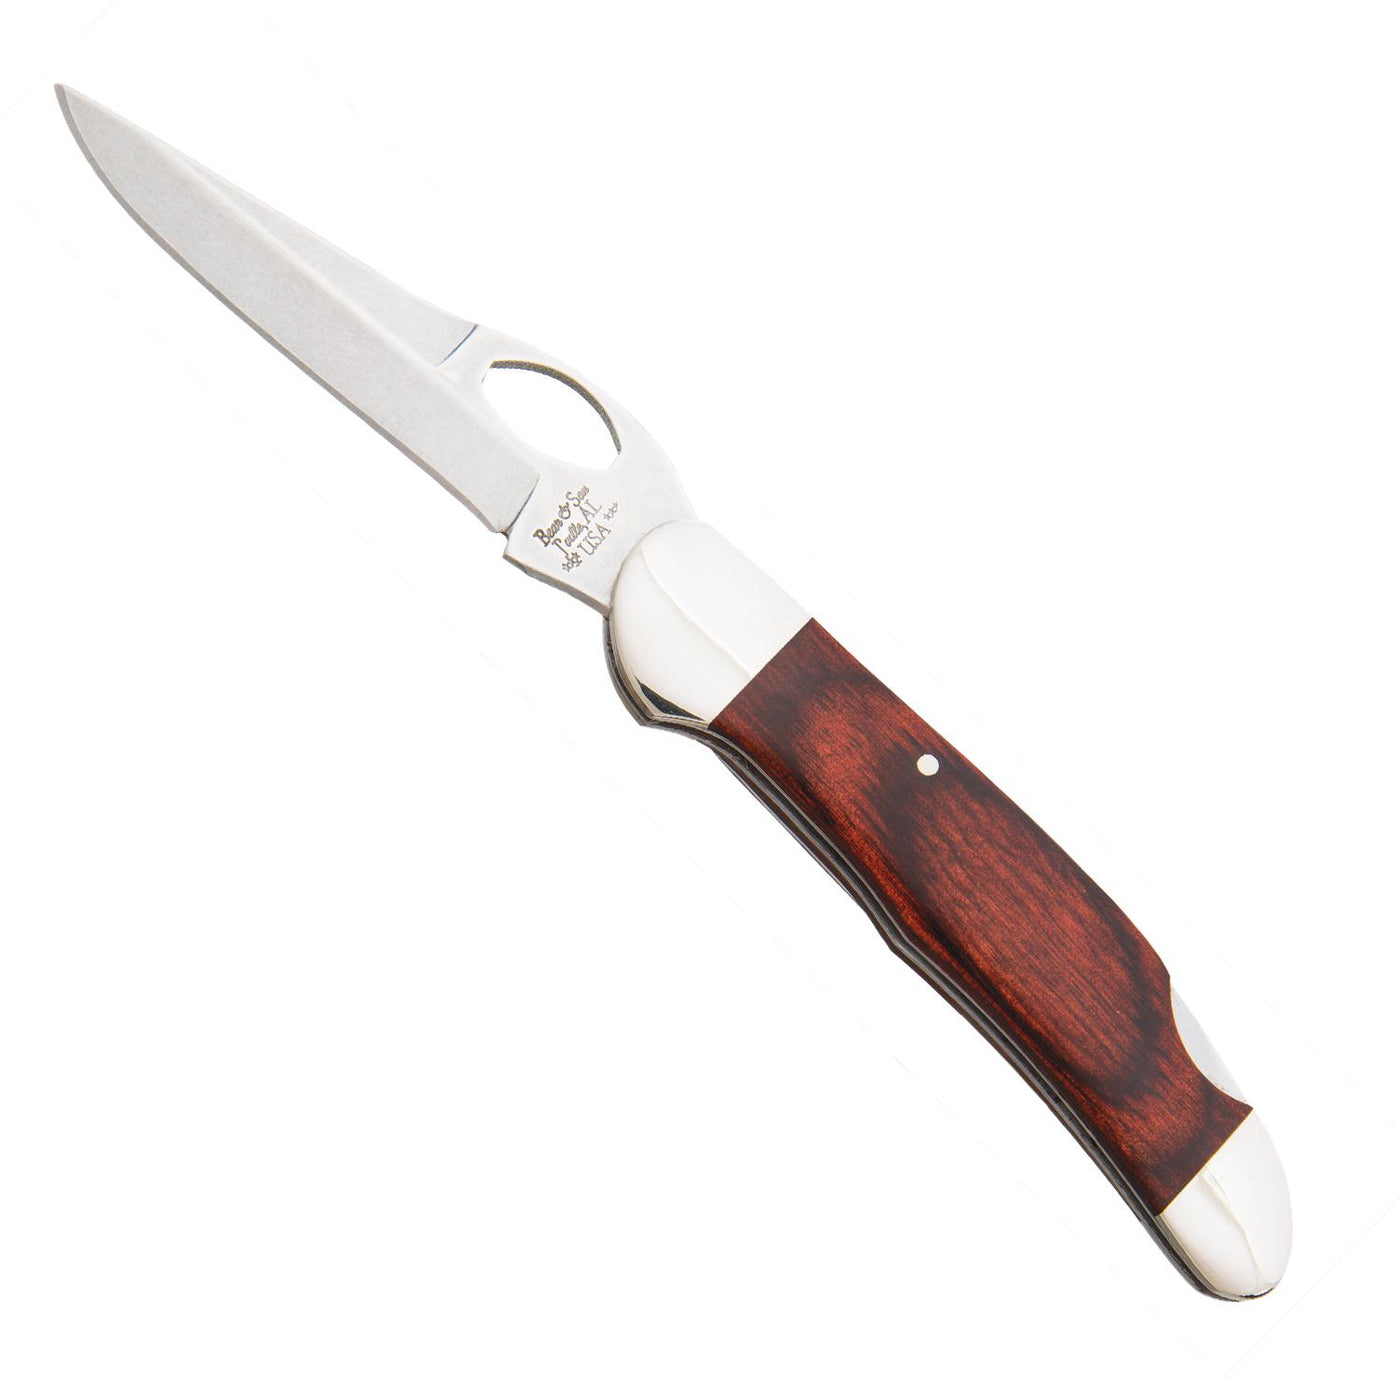 Rosewood Cowhand 4-3/8" Pocket Knife-Knives & Tools-Kevin's Fine Outdoor Gear & Apparel